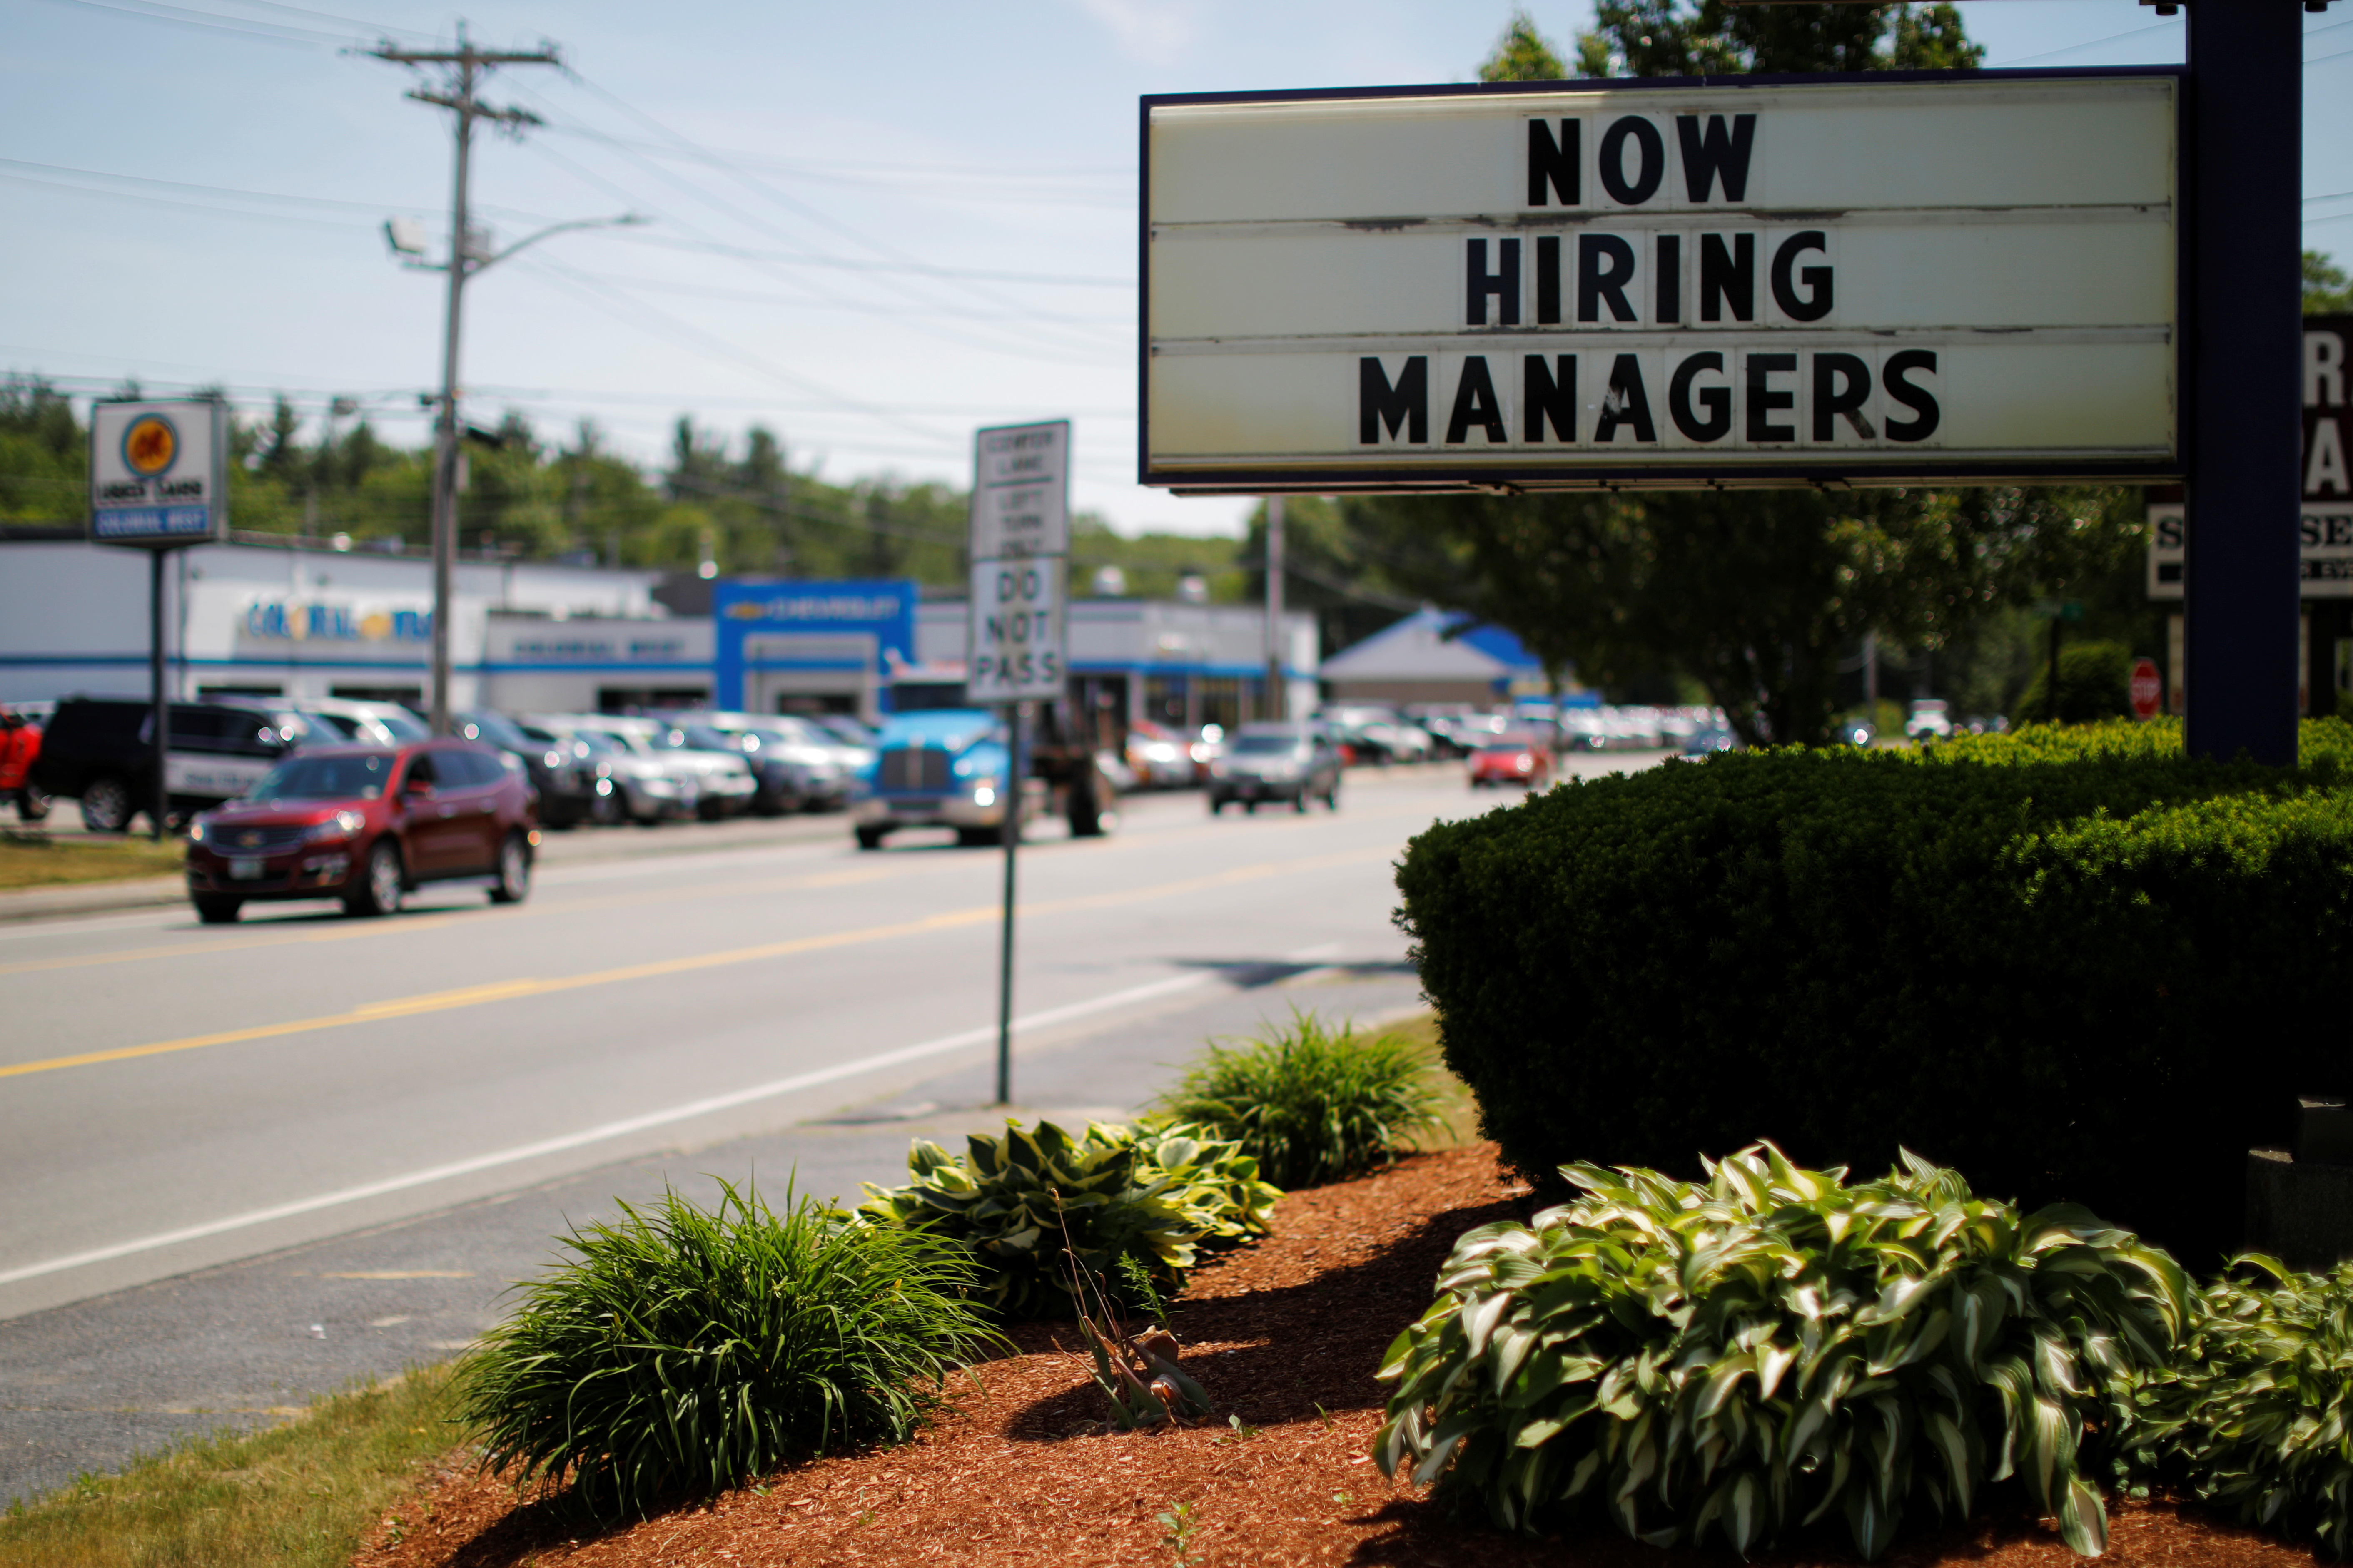 The sign on a Taco Bell restaurant advertises "Now Hiring Managers" in Fitchburg